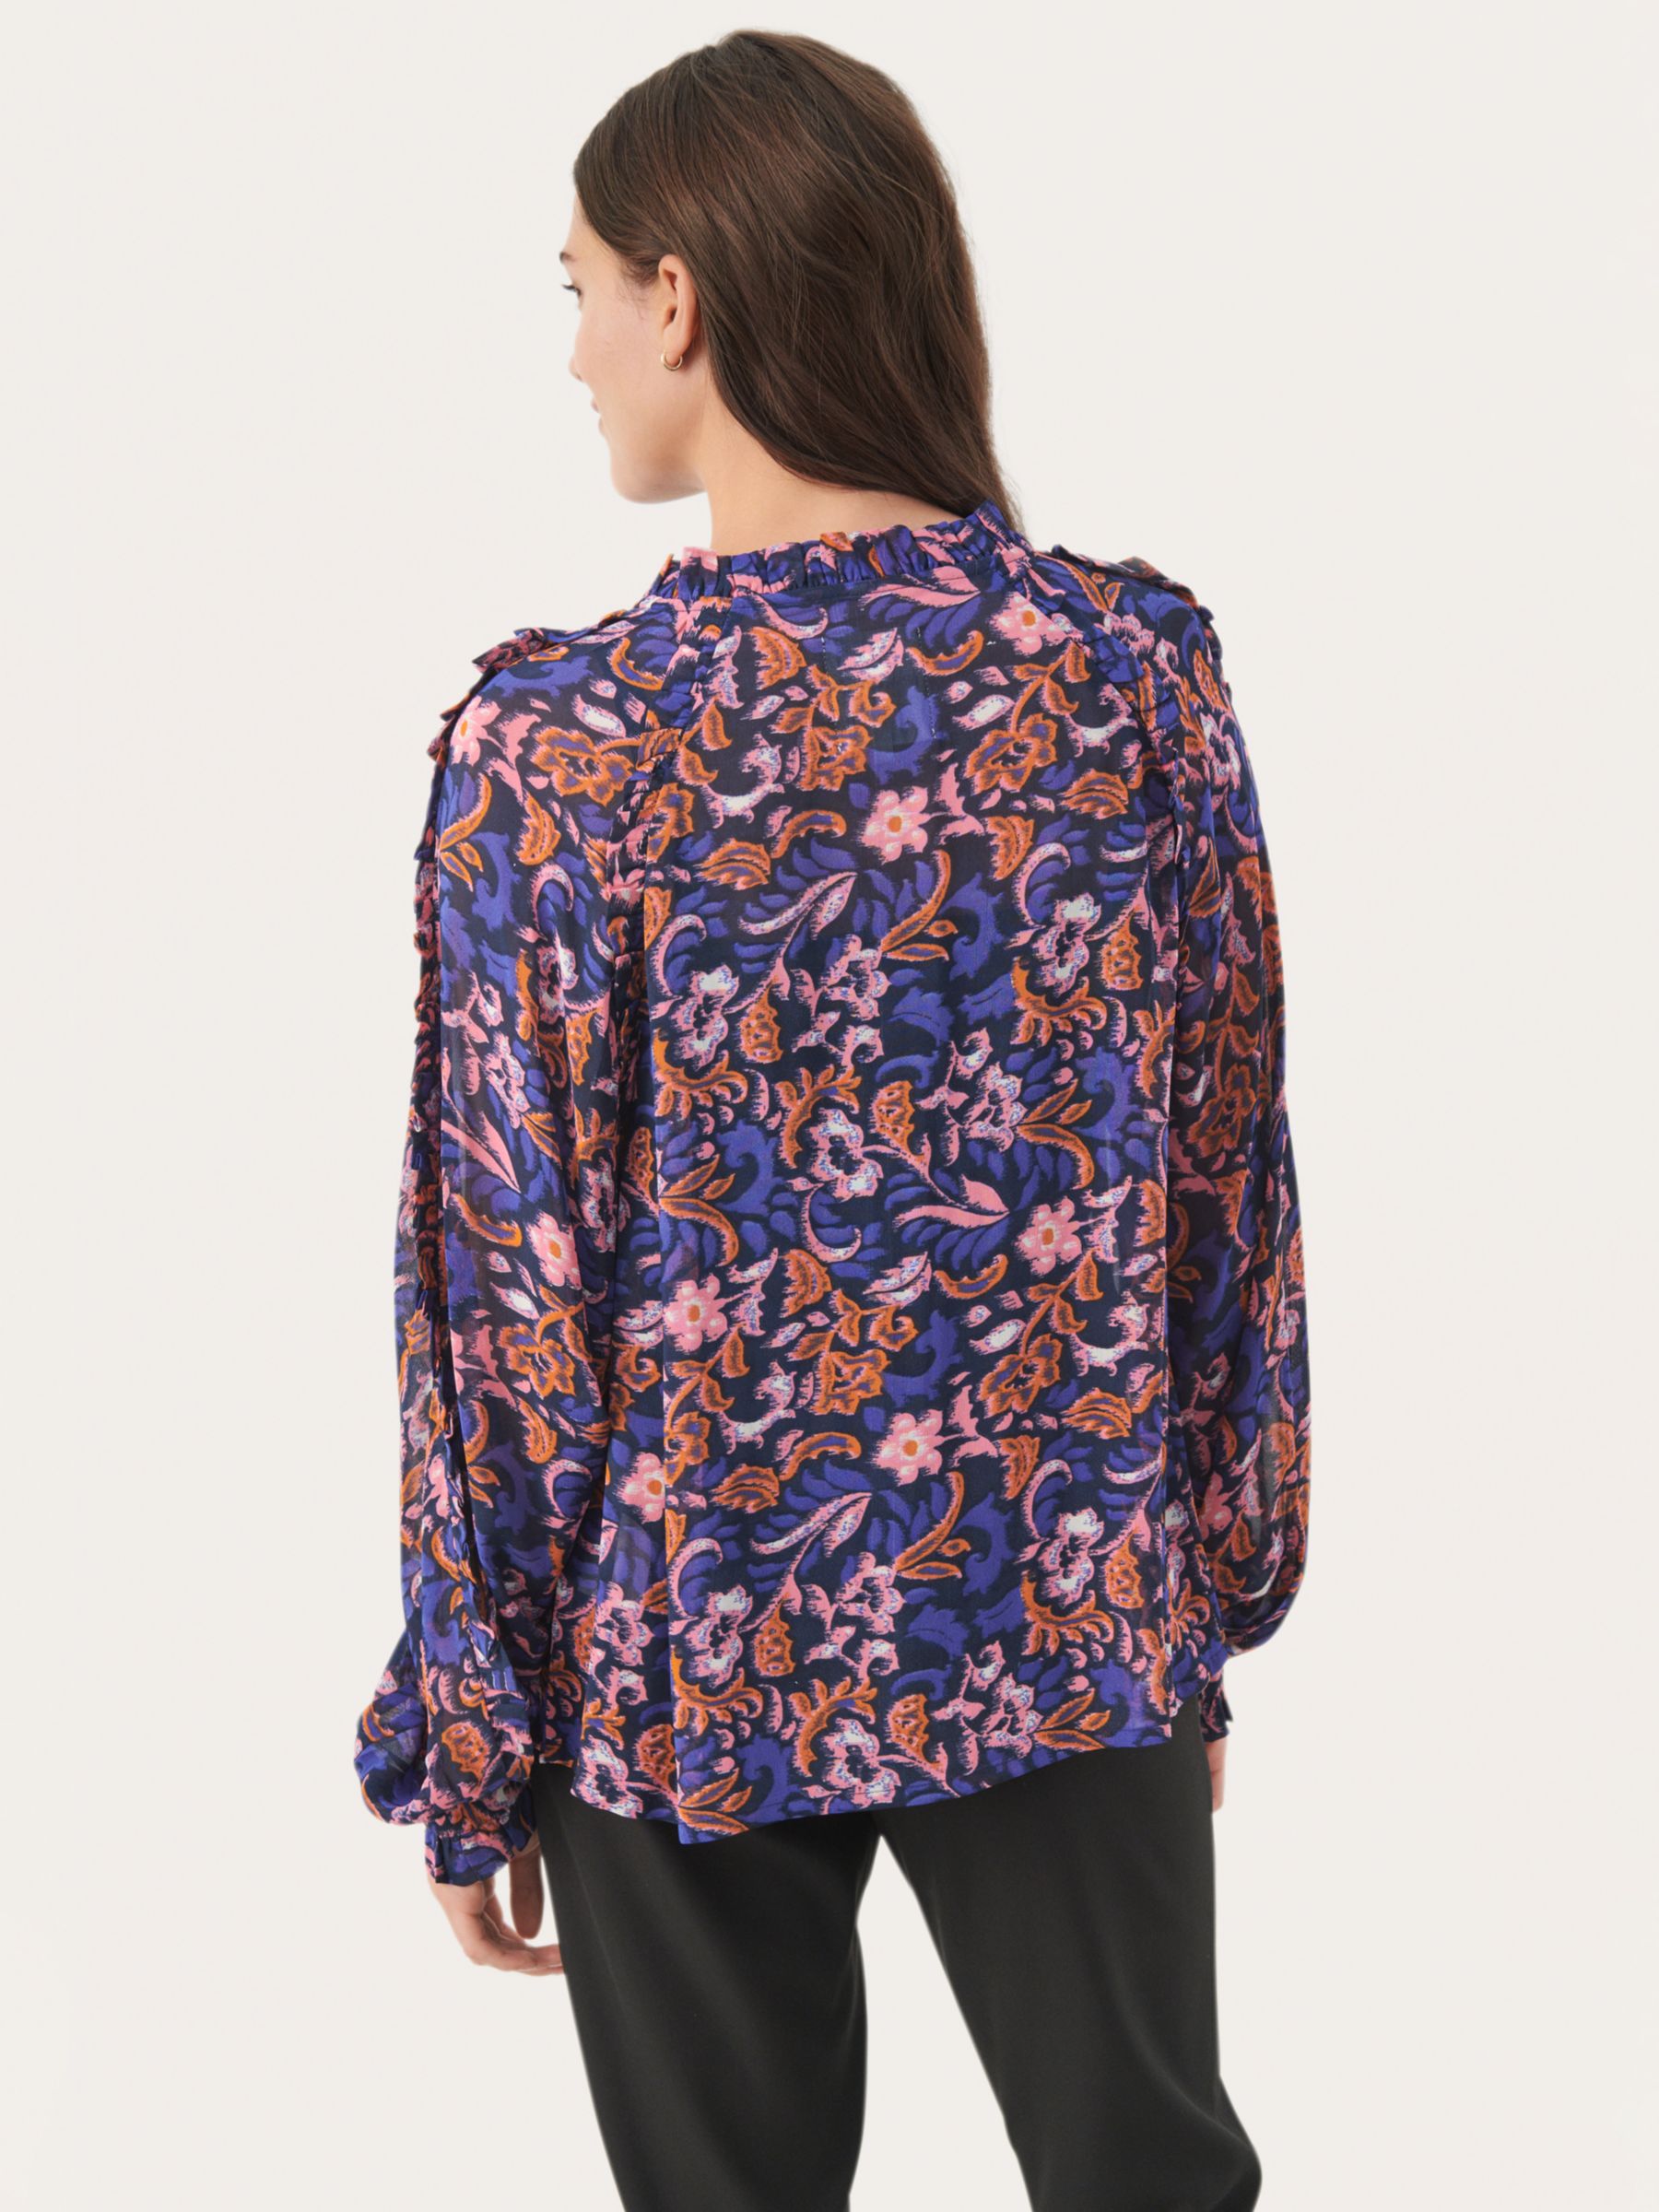 Buy Part Two Dinna Ditsy Print Blouse, Midnight Sail Online at johnlewis.com